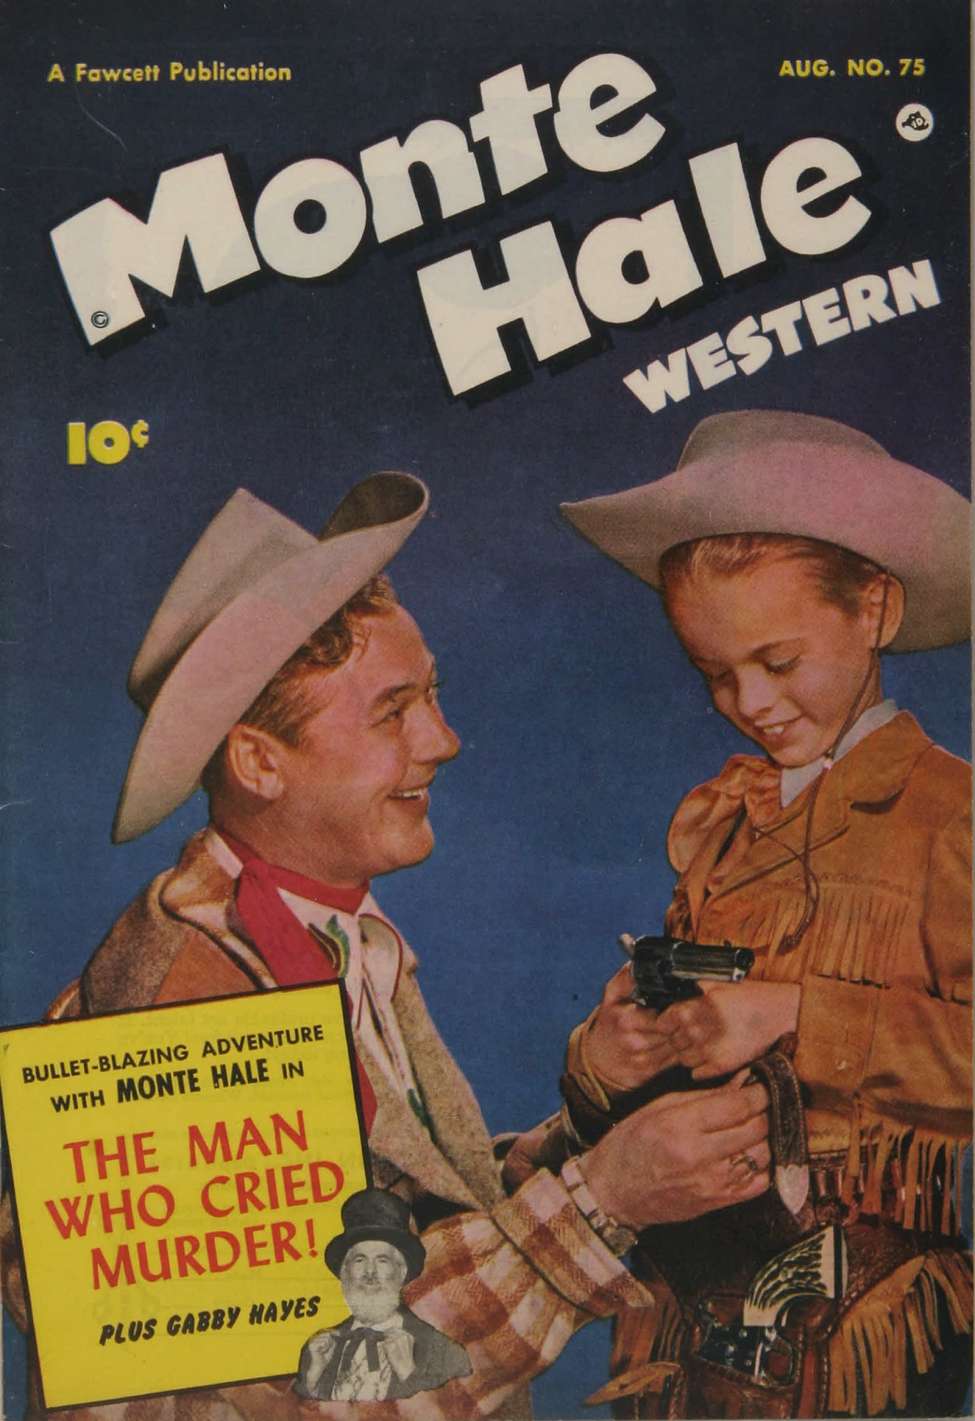 Book Cover For Monte Hale Western 75 - Version 2